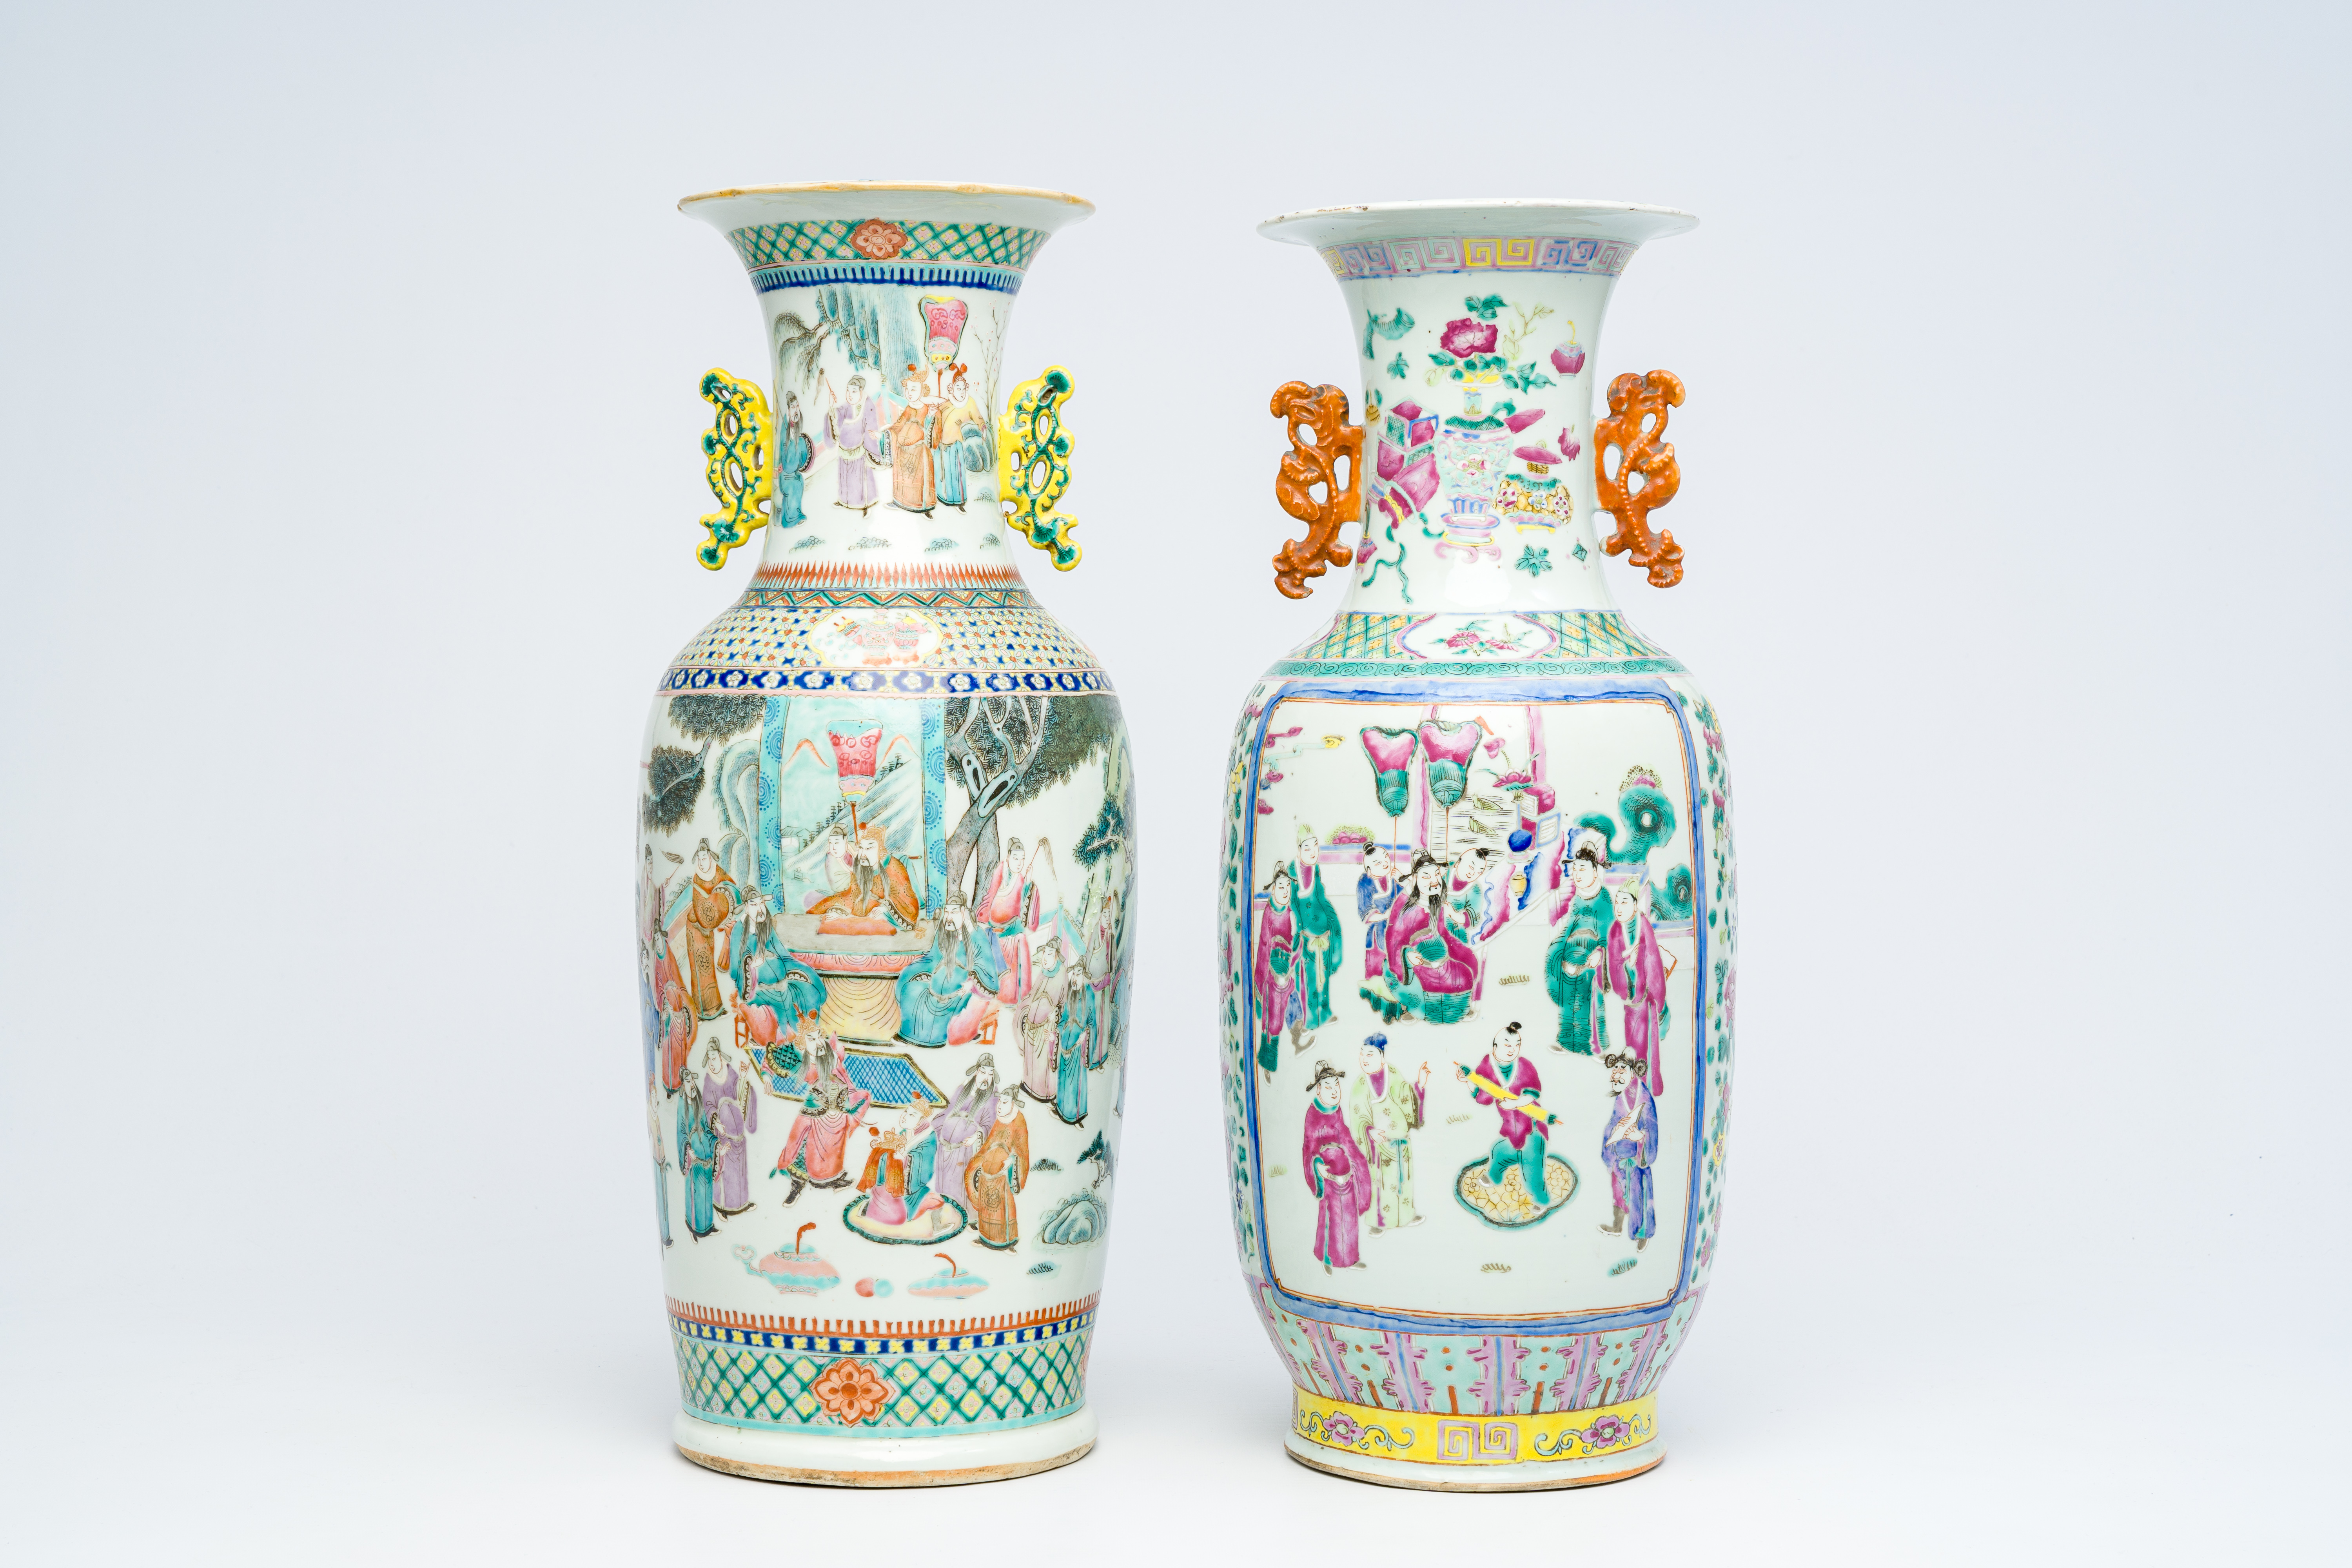 Two Chinese famille rose vases with figurative design, 19th C.